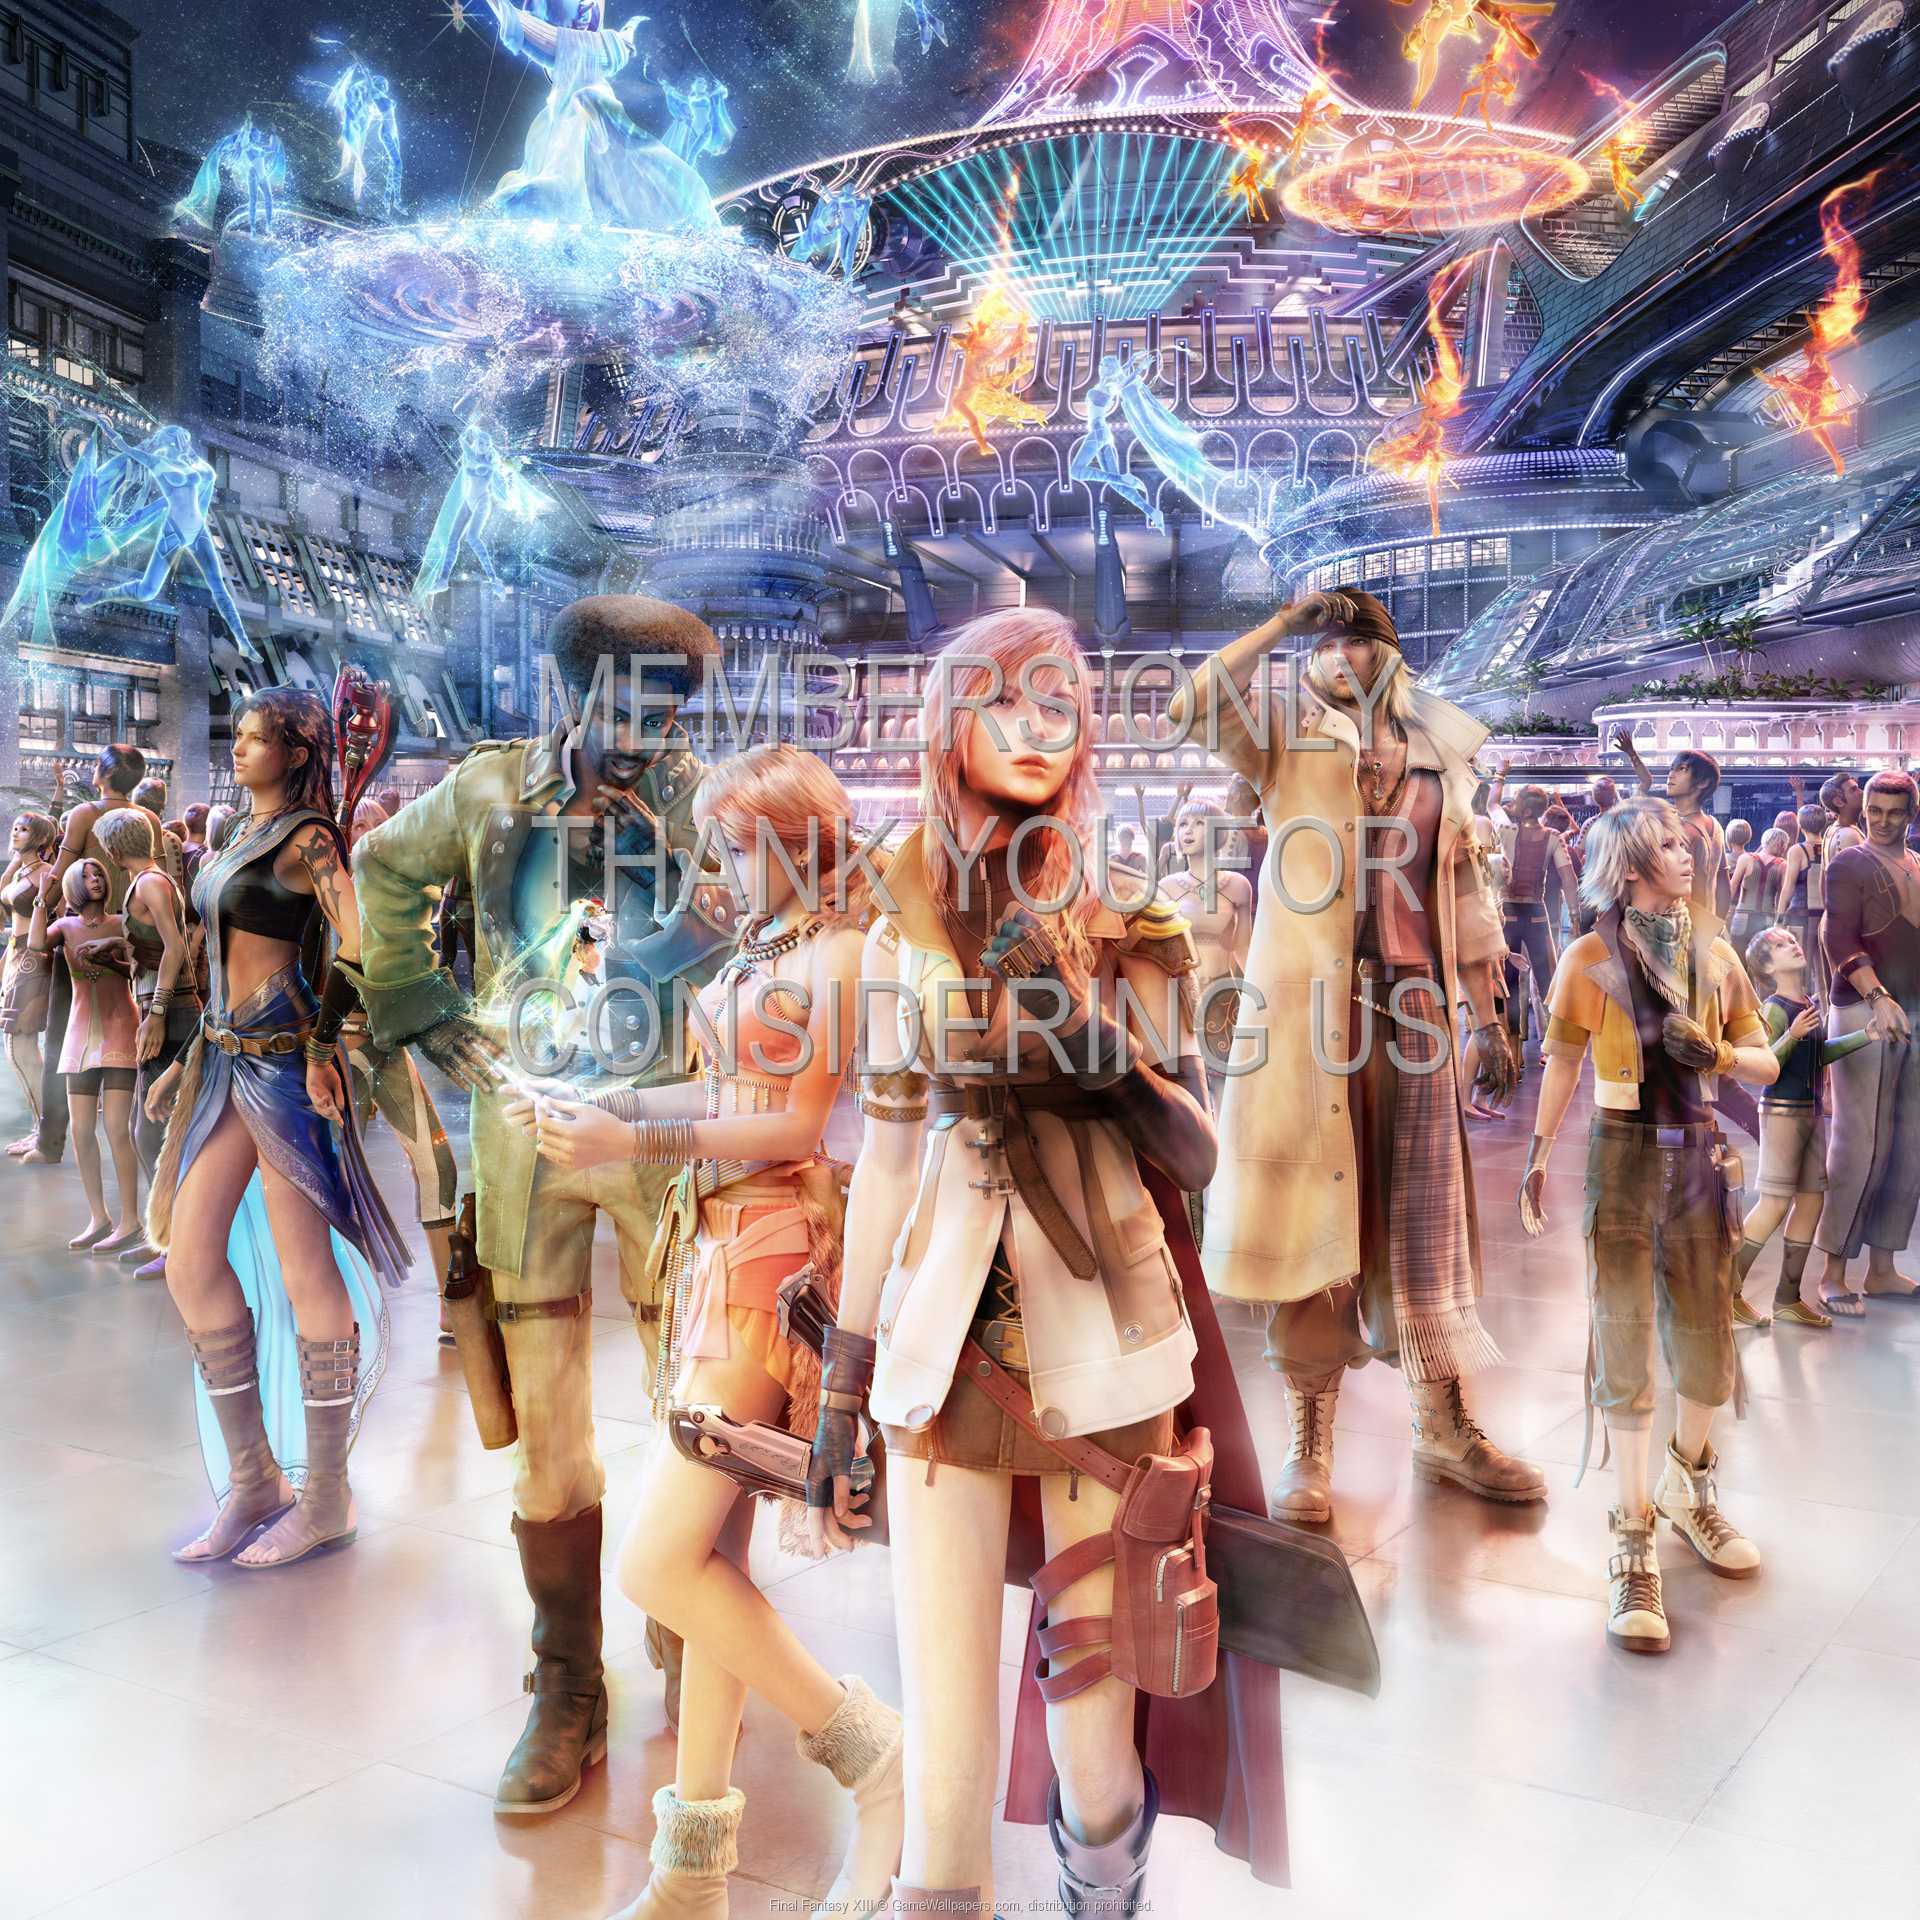 Final Fantasy XIII 1080p%20Horizontal Mobile wallpaper or background 11